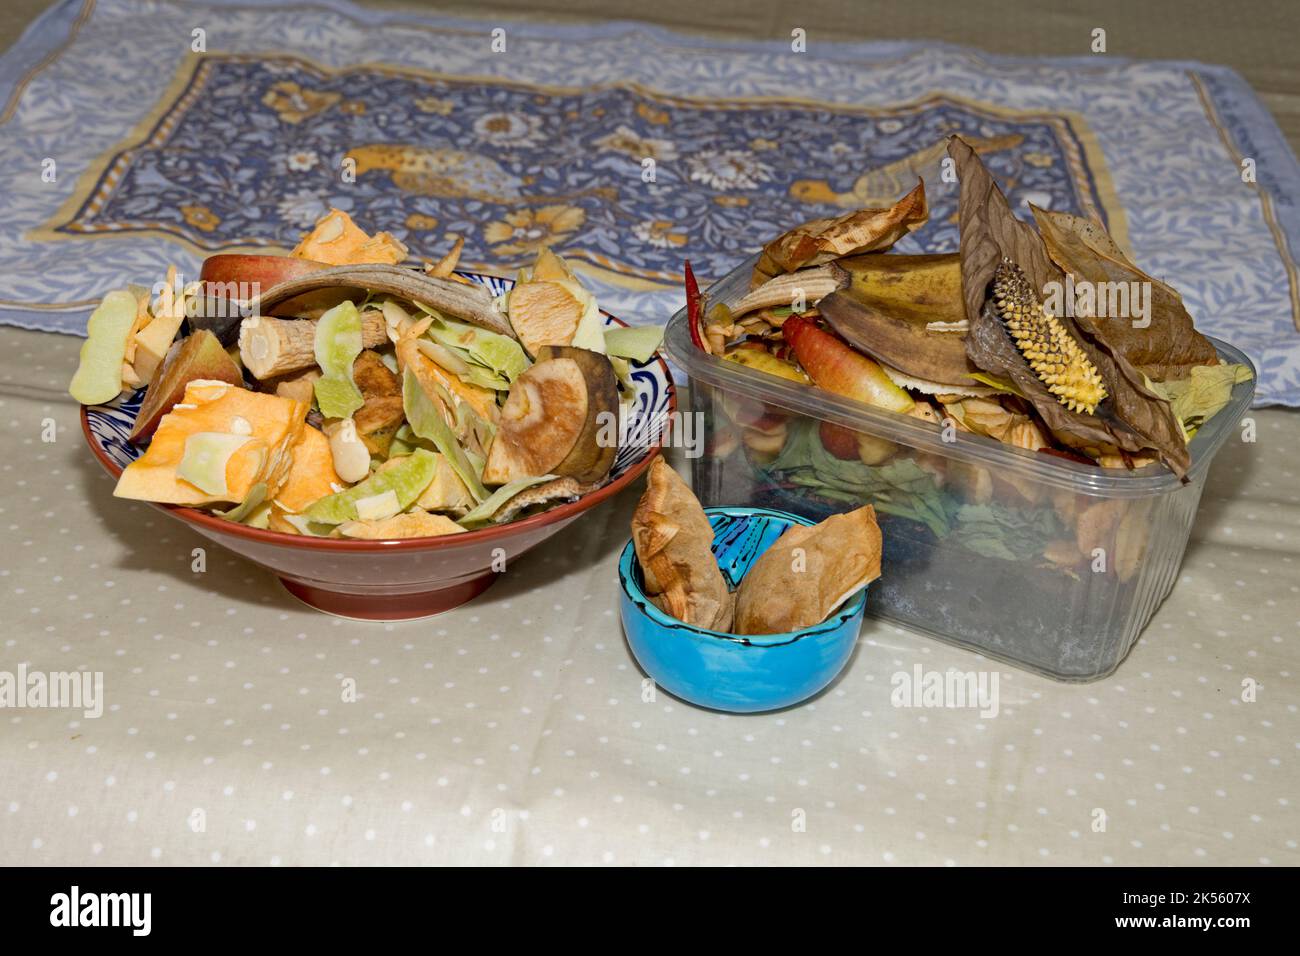 Containers of food waste set aside for composting Stock Photo